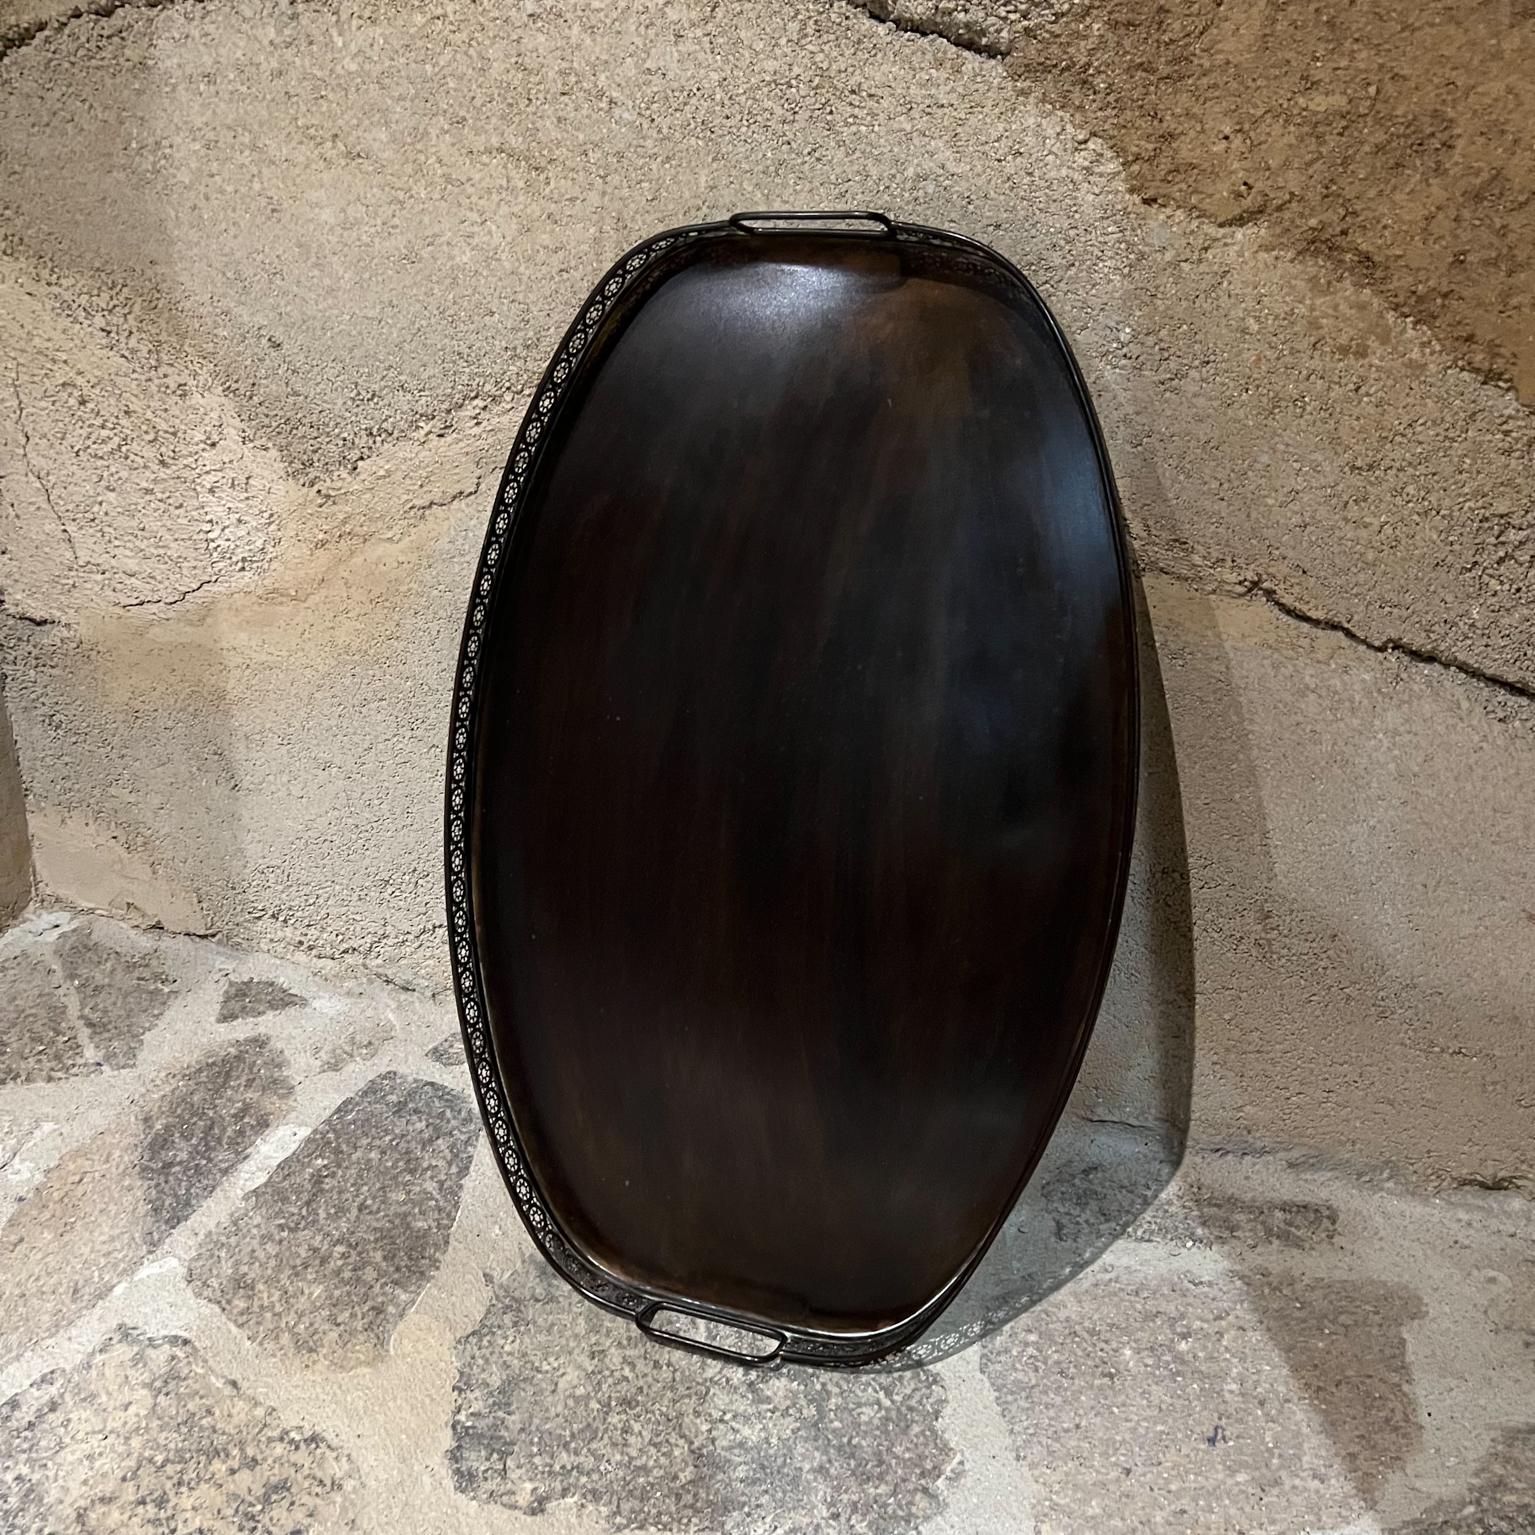 Italian service tray in patinated brass.
Oval shape with handles. Lovely decorative trim
2 tall x 23 w x 14.75 d
Stamped MADE IN ITALY
Preowned original vintage condition.
See images provided.

